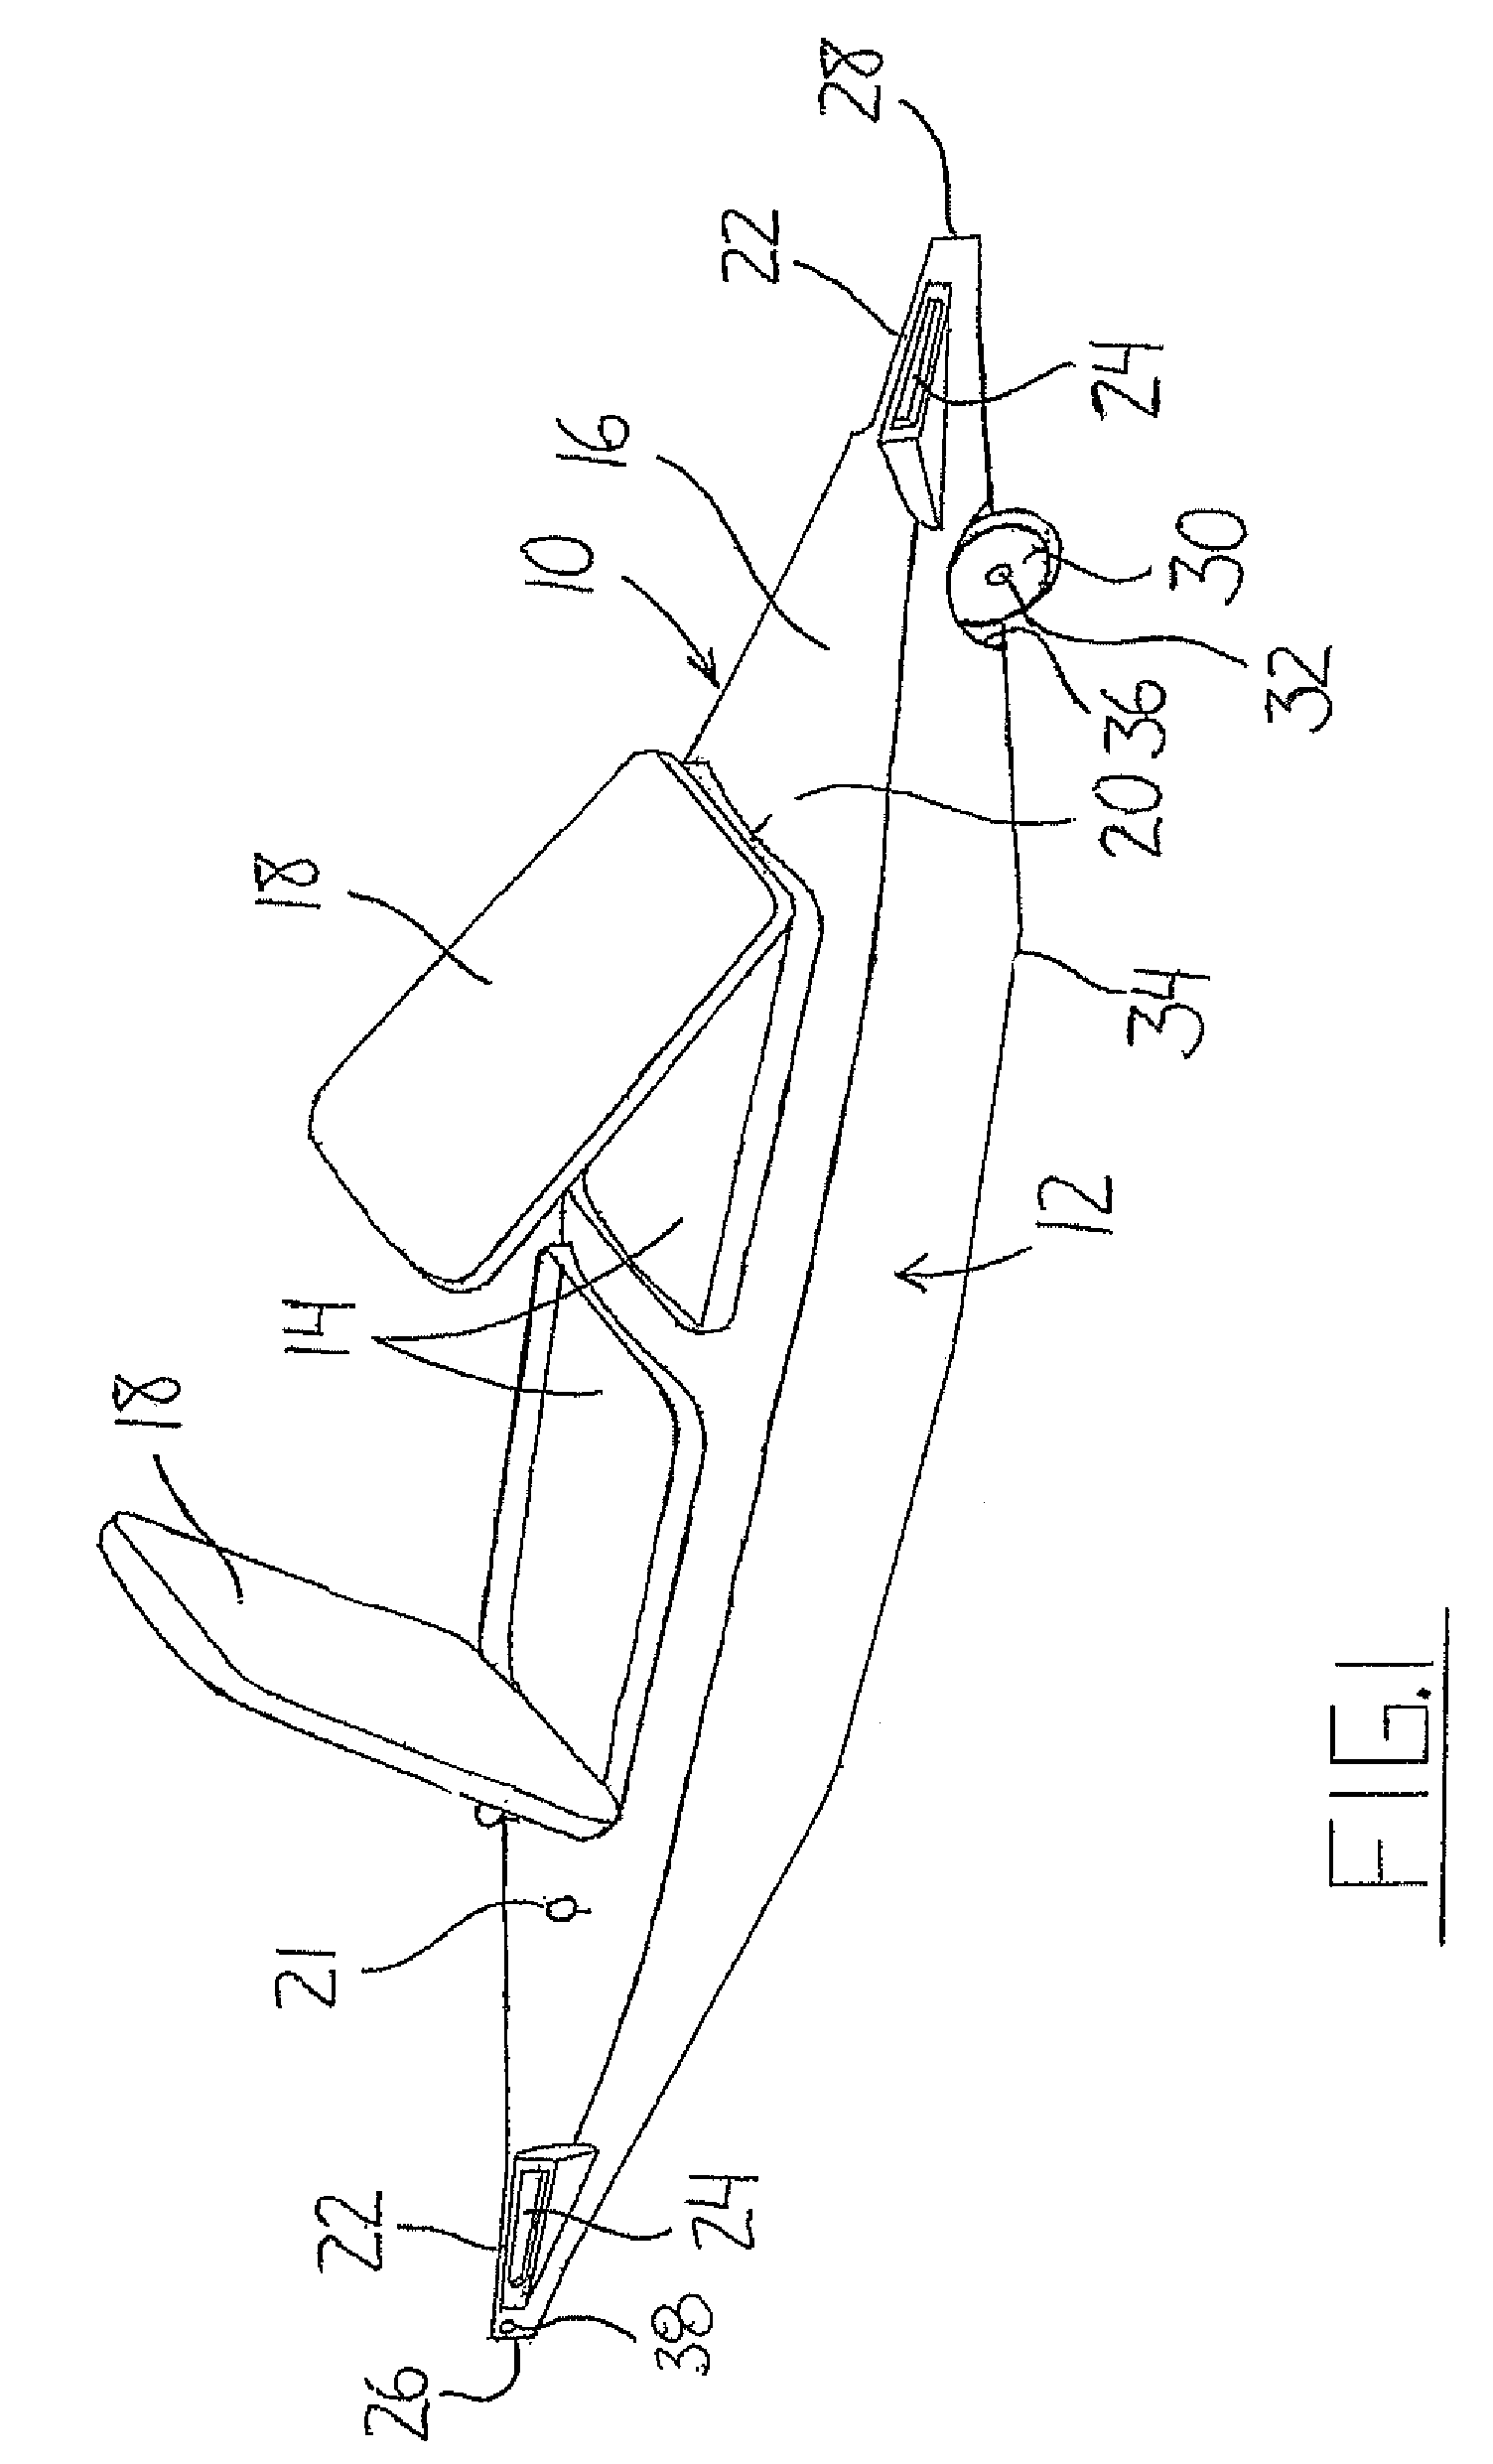 Cargo transport device for towing behind watercraft